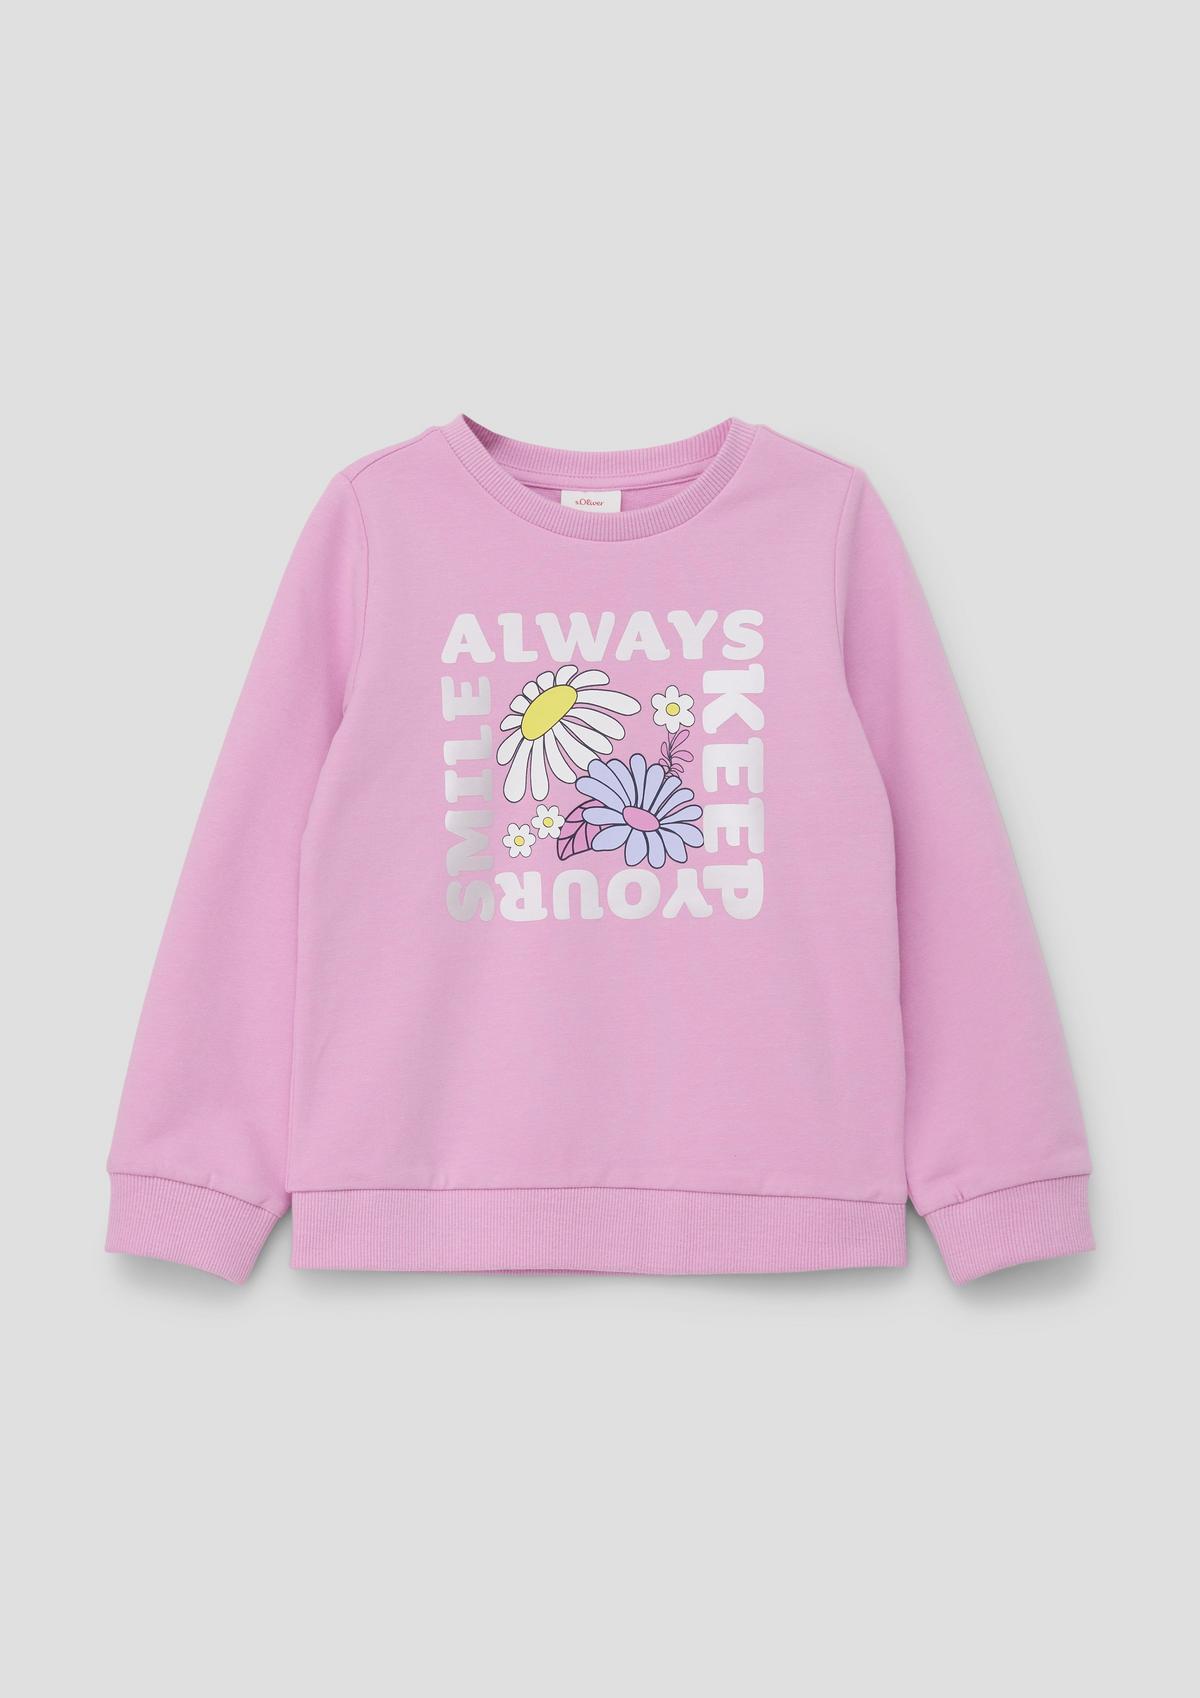 s.Oliver Sweatshirt with reflective printed lettering